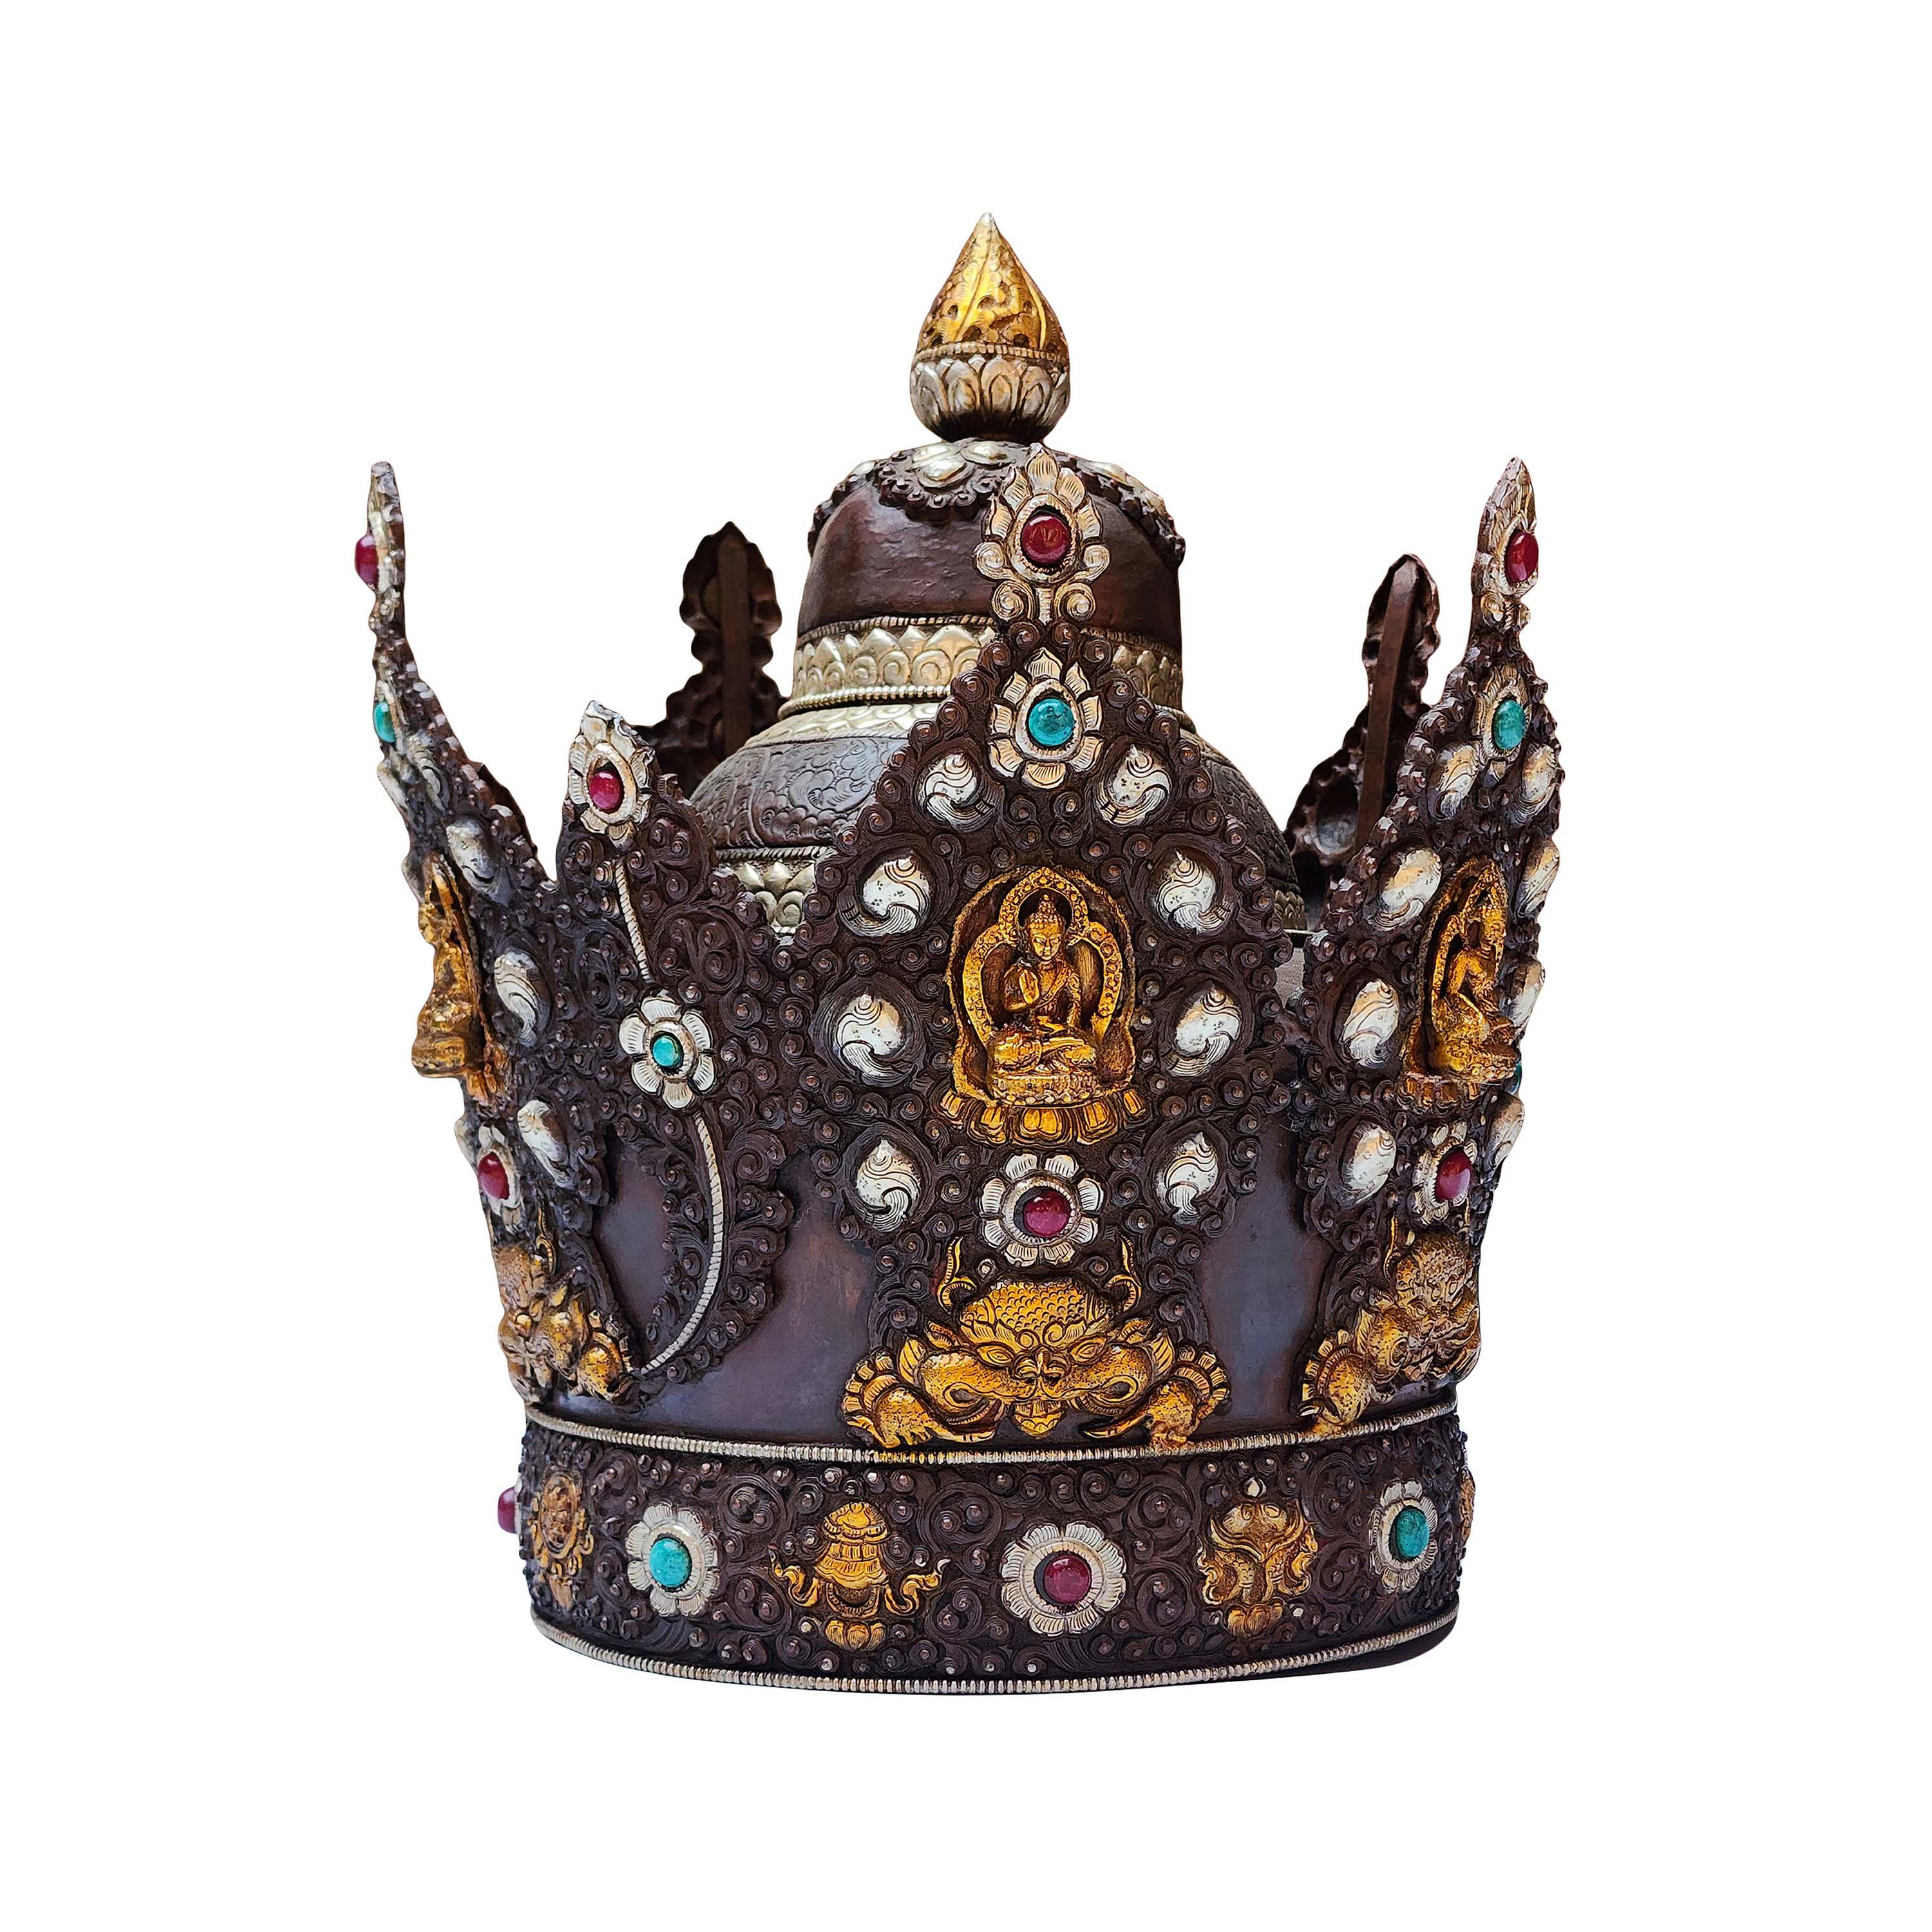 crown With Gem-encrusted, Handmade Buddhist Crown With Vairochana Buddha Design, Copper, Gold And Silver Plated